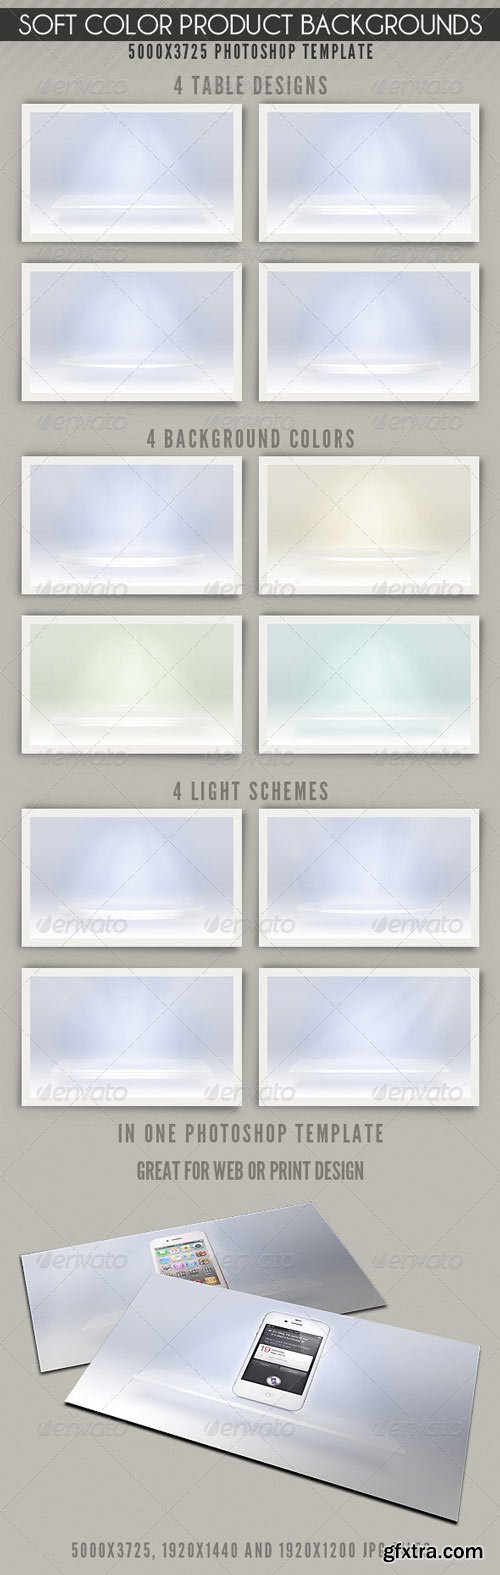 GraphicRiver - Soft Color Product Backgrounds - 1951500